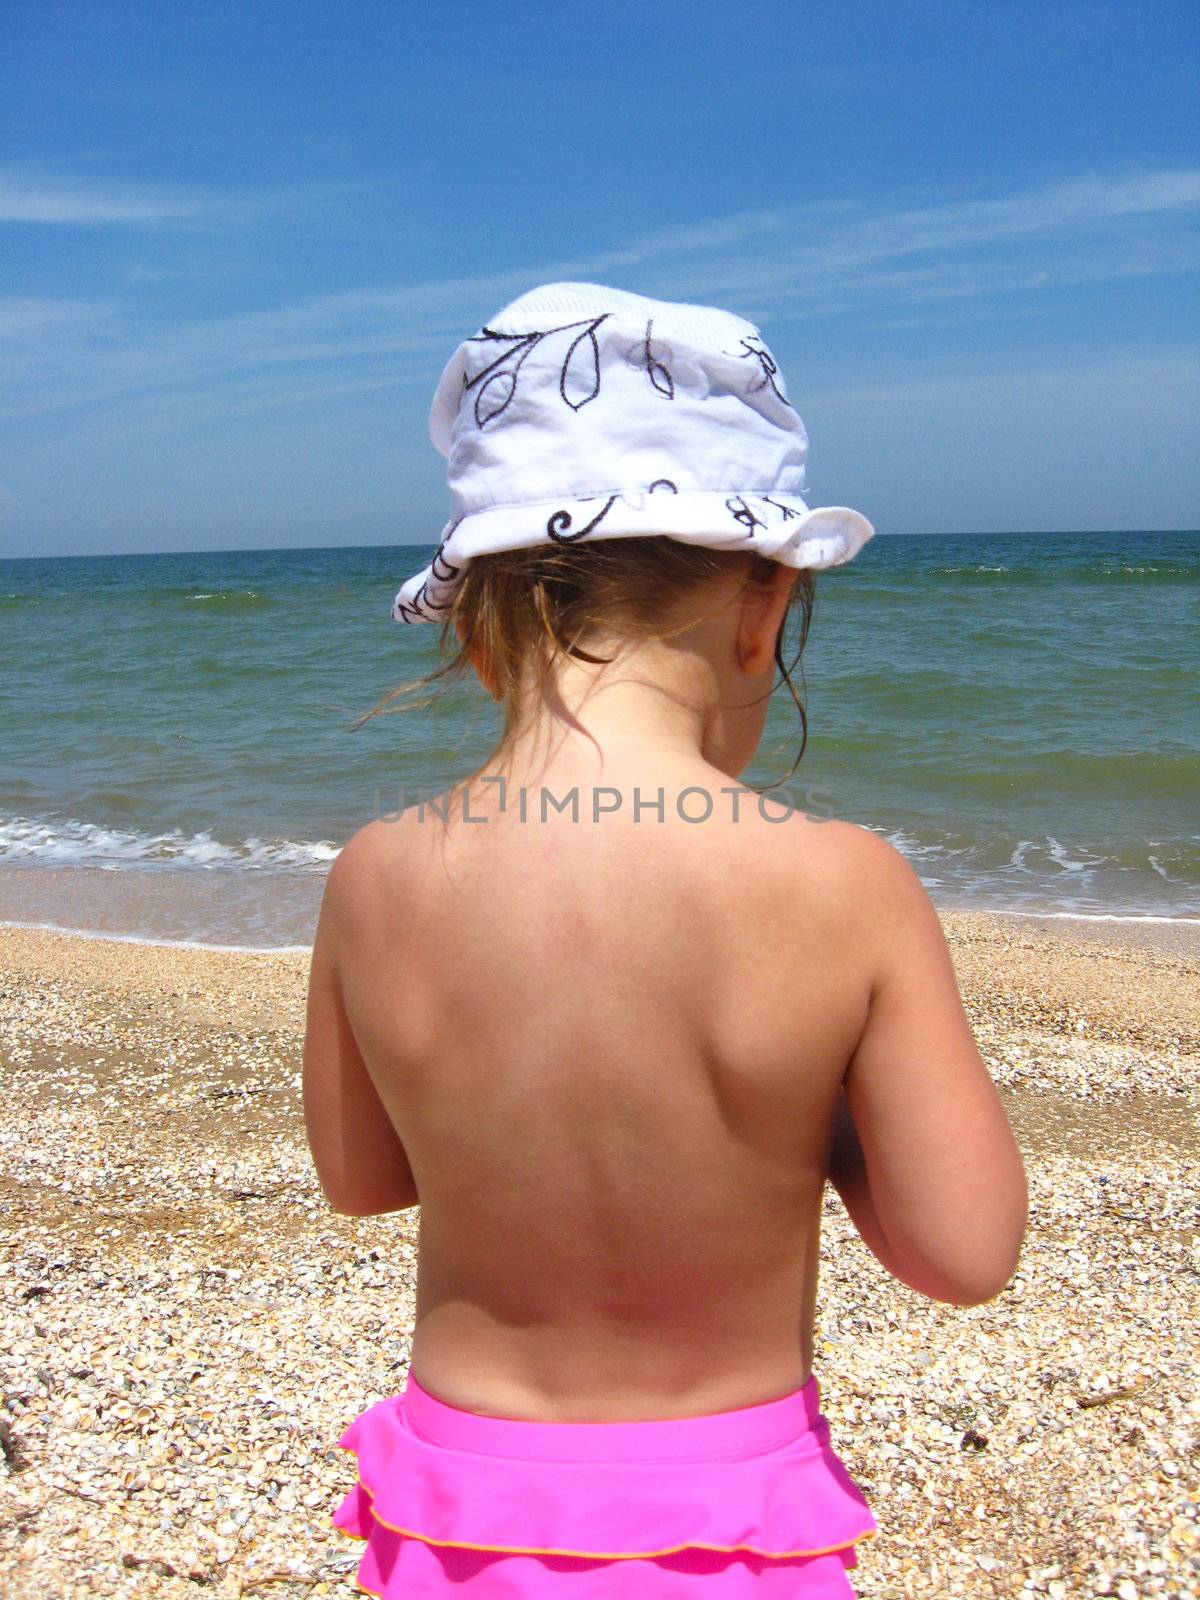 The back of little girl standing near the sea